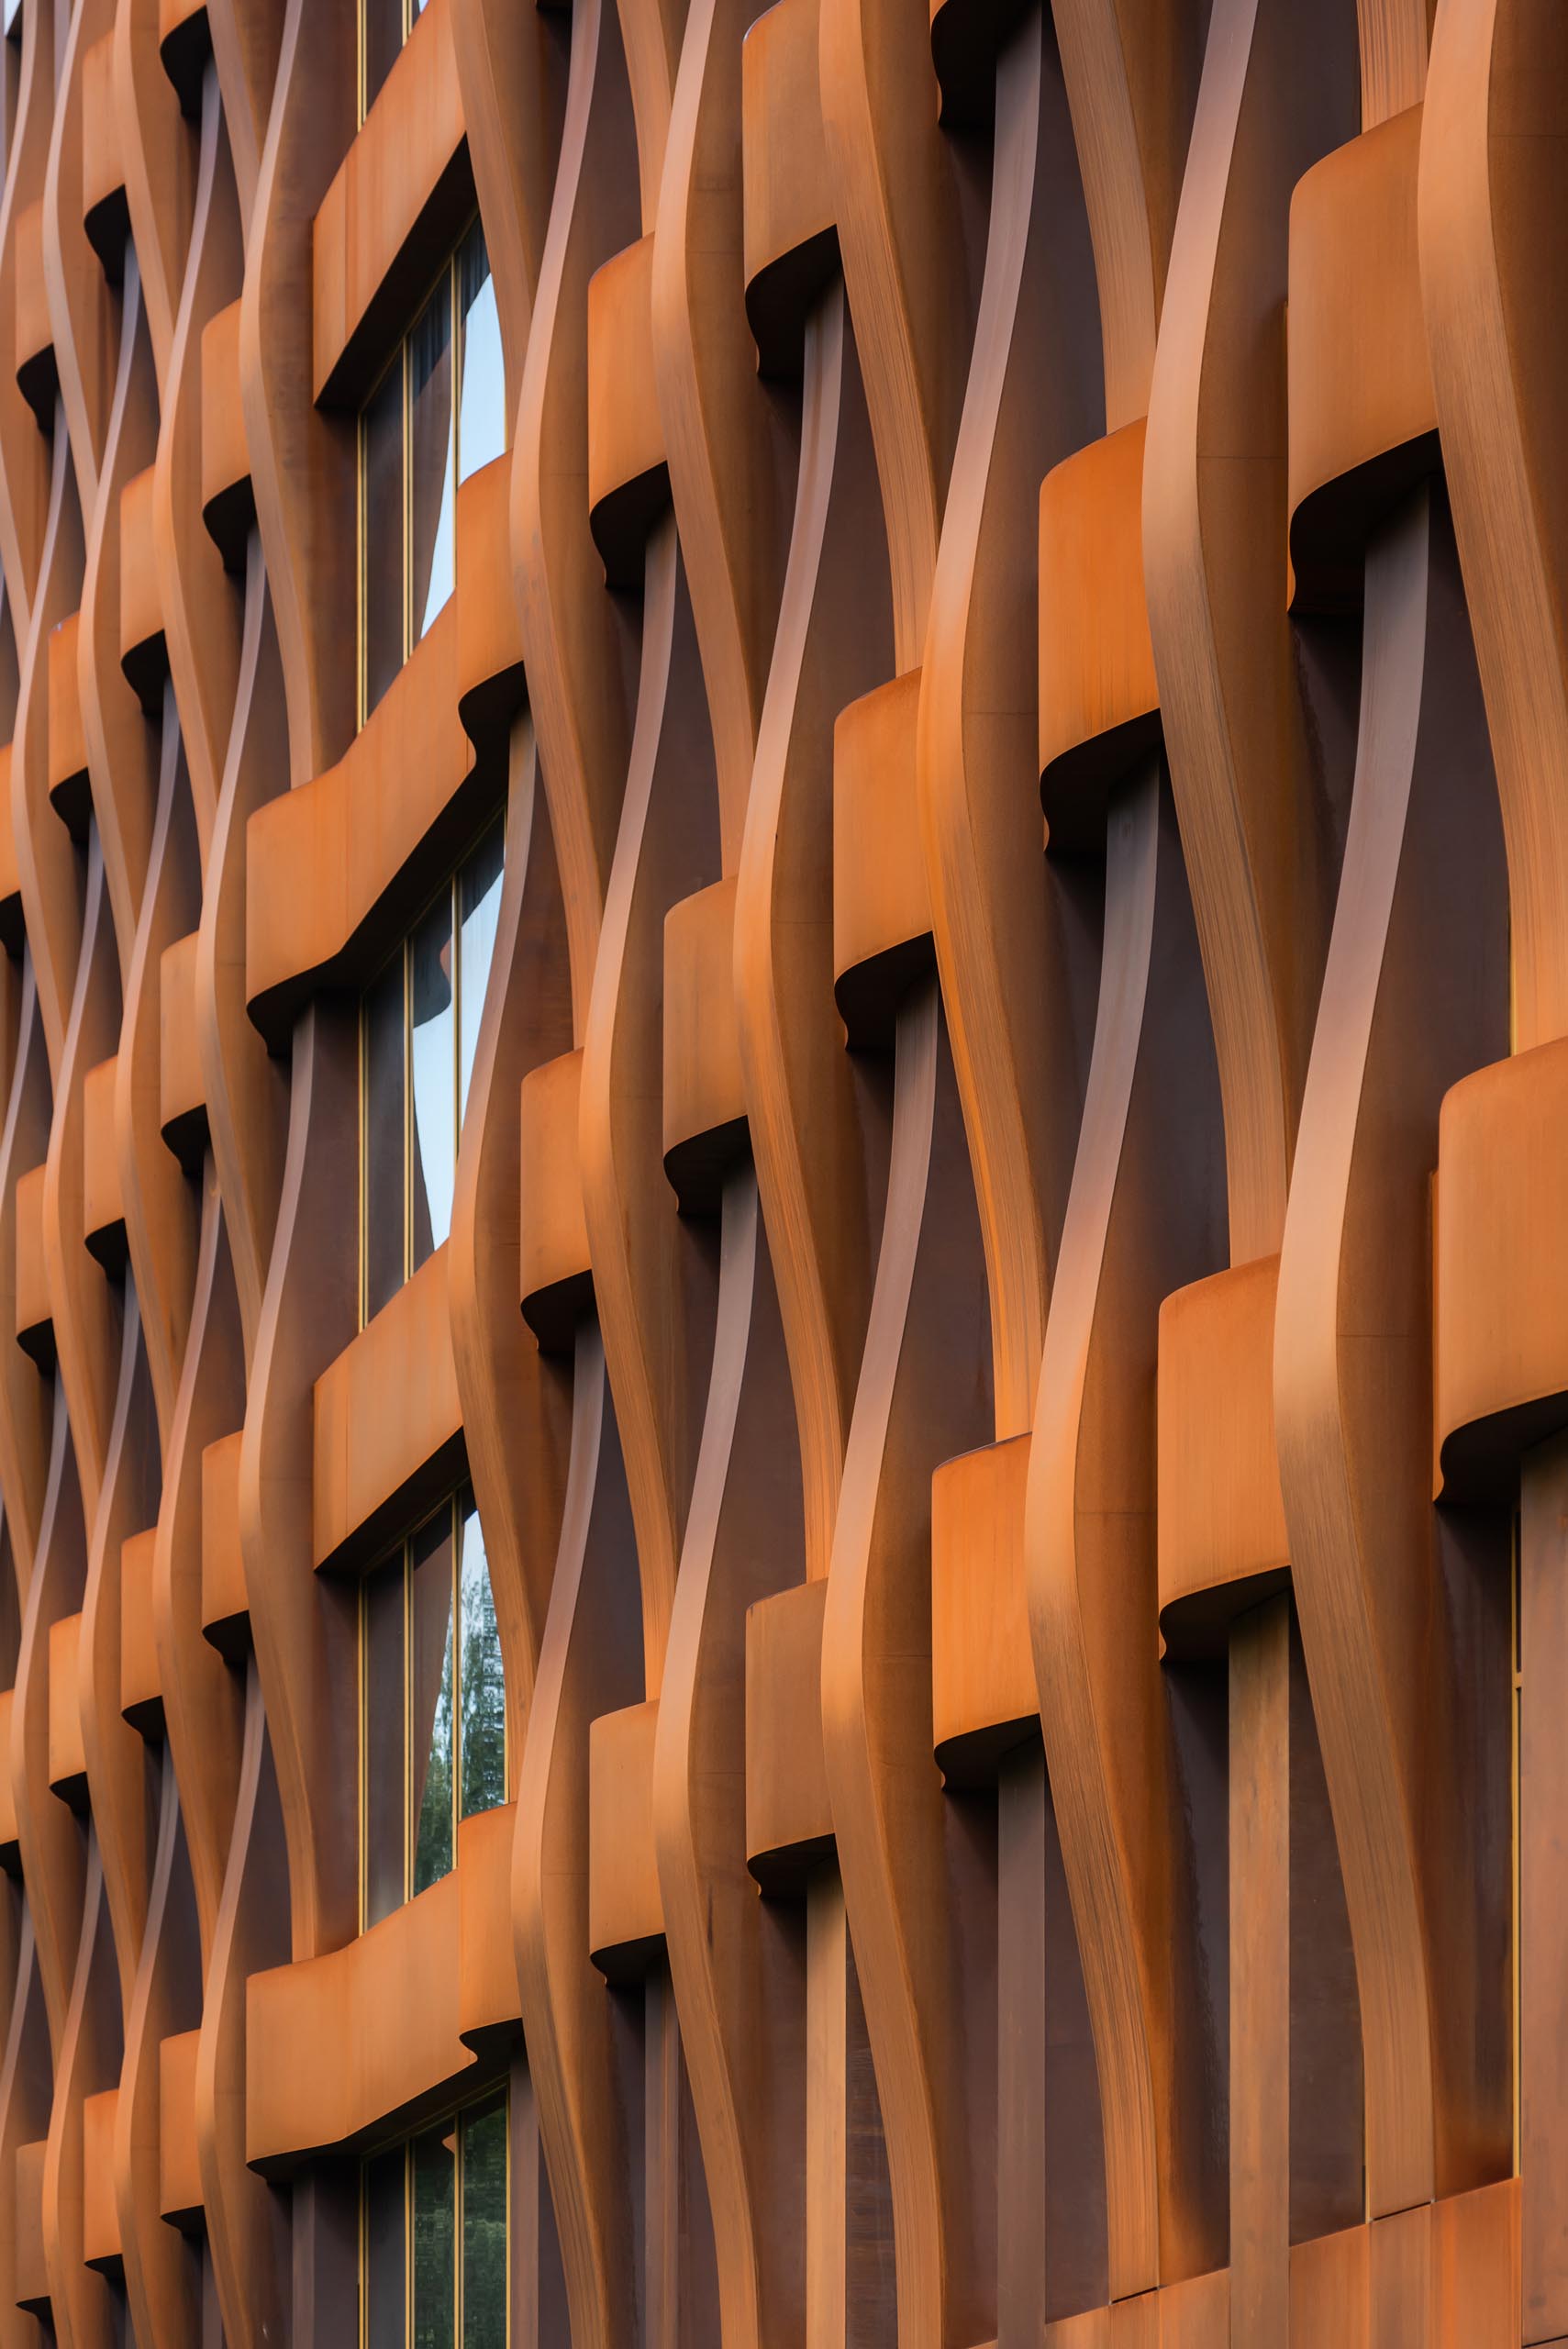 The sculptural weathered steel facade of this modern office building is constructed in a geometric grid and presents itself as a dynamic, organically flowing fabric of loose "warp and weft" threads.